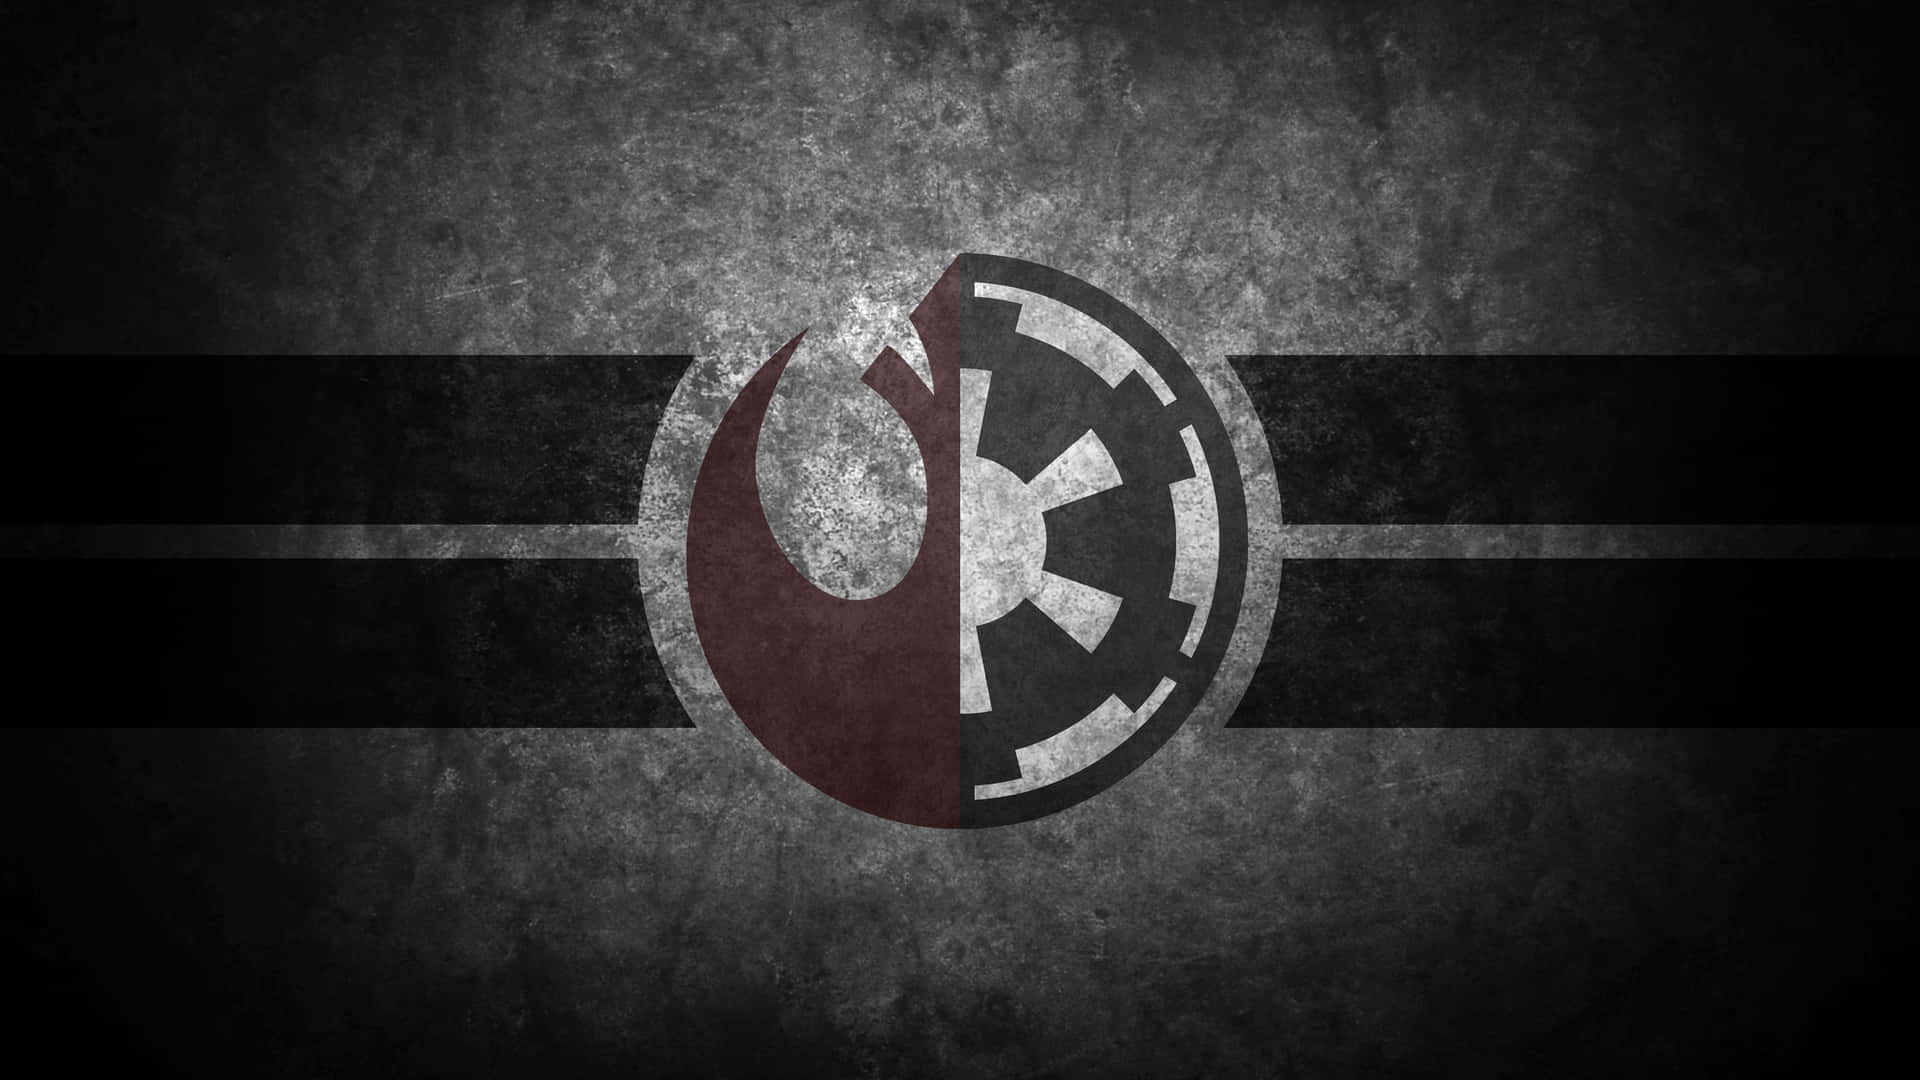 The Galactic Empire of Star Wars Wallpaper